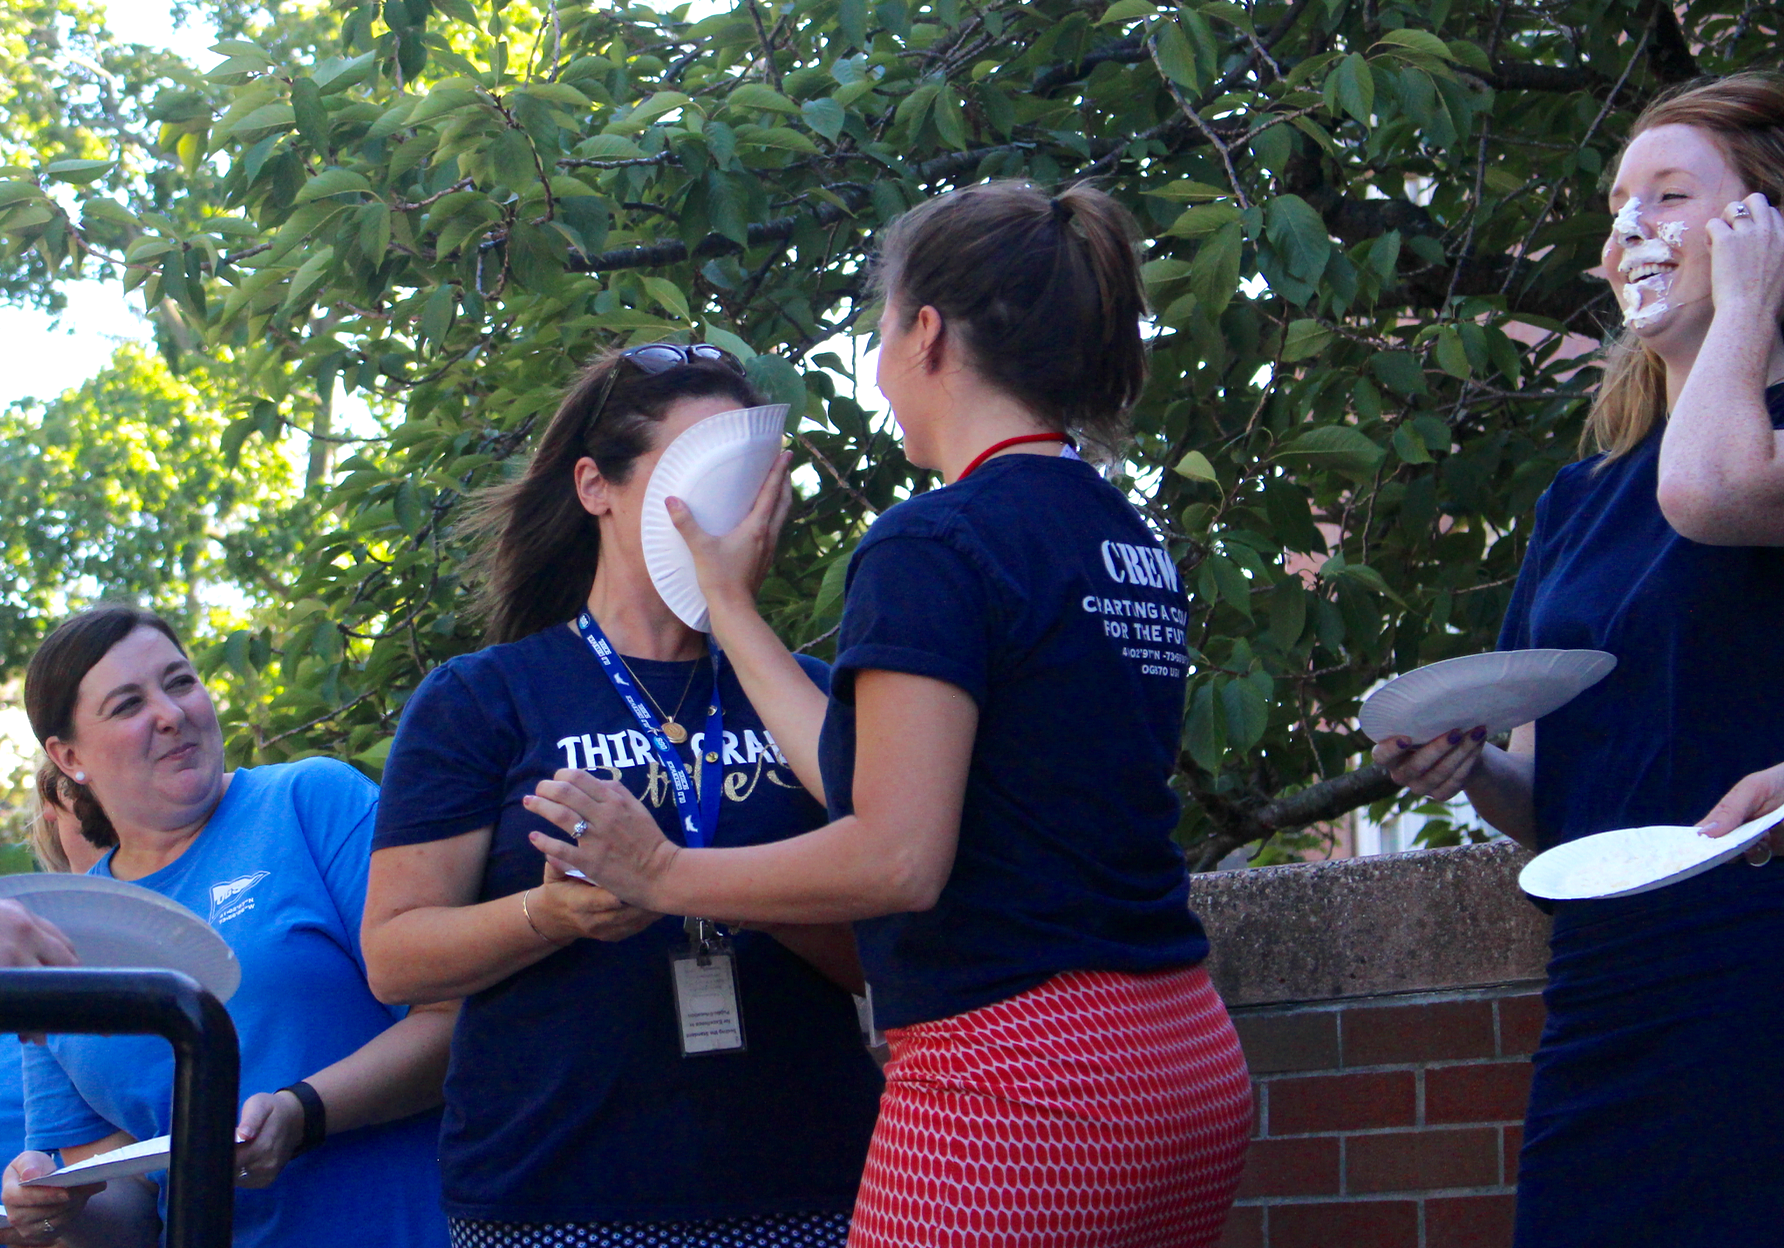 Teachers at Old Greenwich School participated in the pie smashing event on Sept. 22, 2017 Photo: Leslie Yager